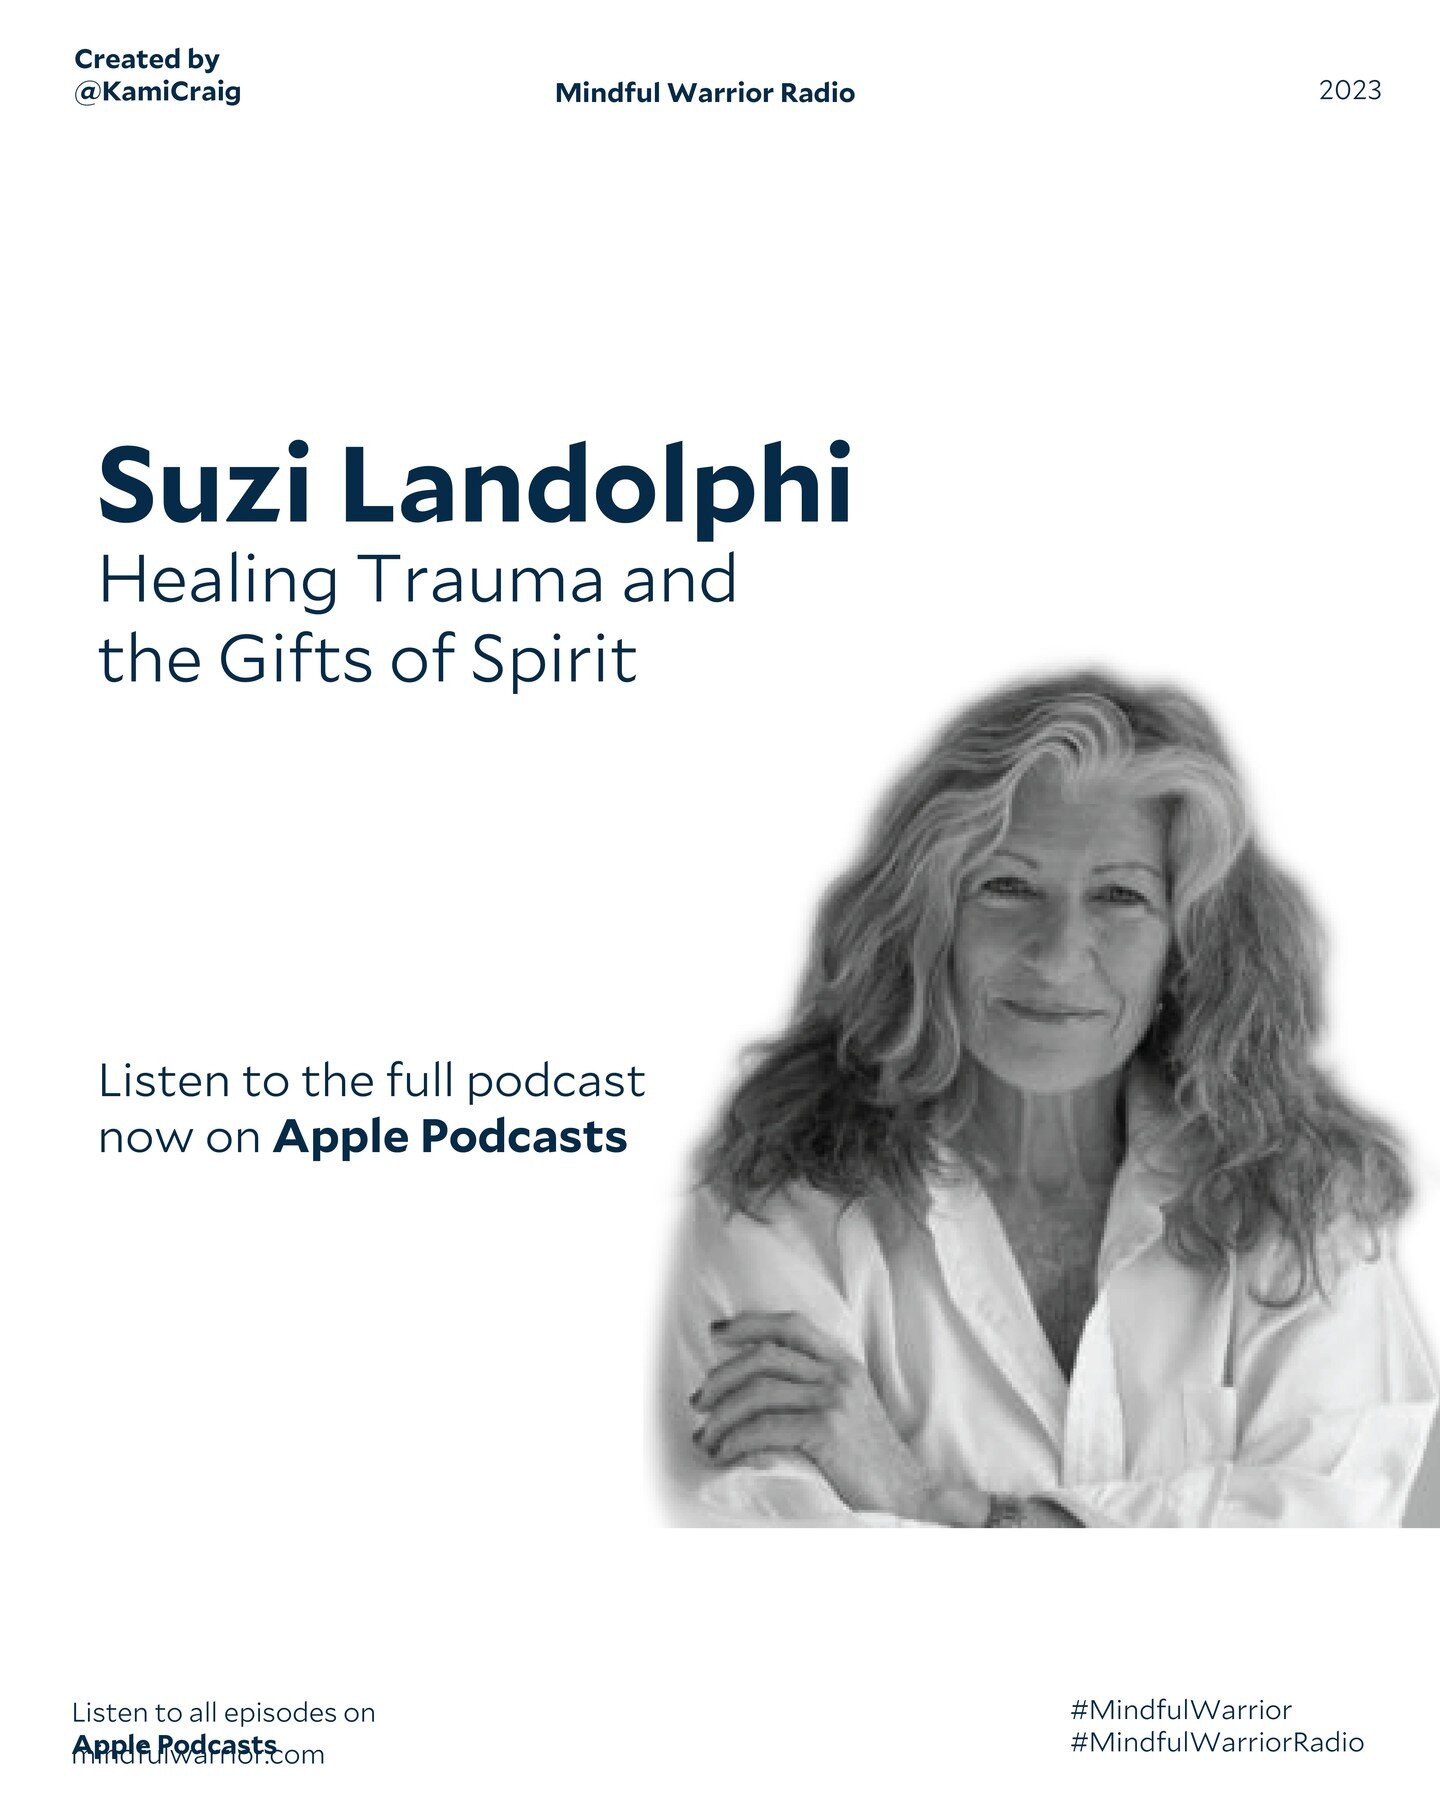 On episode twenty-three of Mindful Warrior Radio, I am joined by Suzi Landolphi, a Licensed Marriage and Family Therapist with extensive experience working with veterans. Most recently, Suzi worked as a Senior PATHH Guide at Boulder Crest Retreat (BC